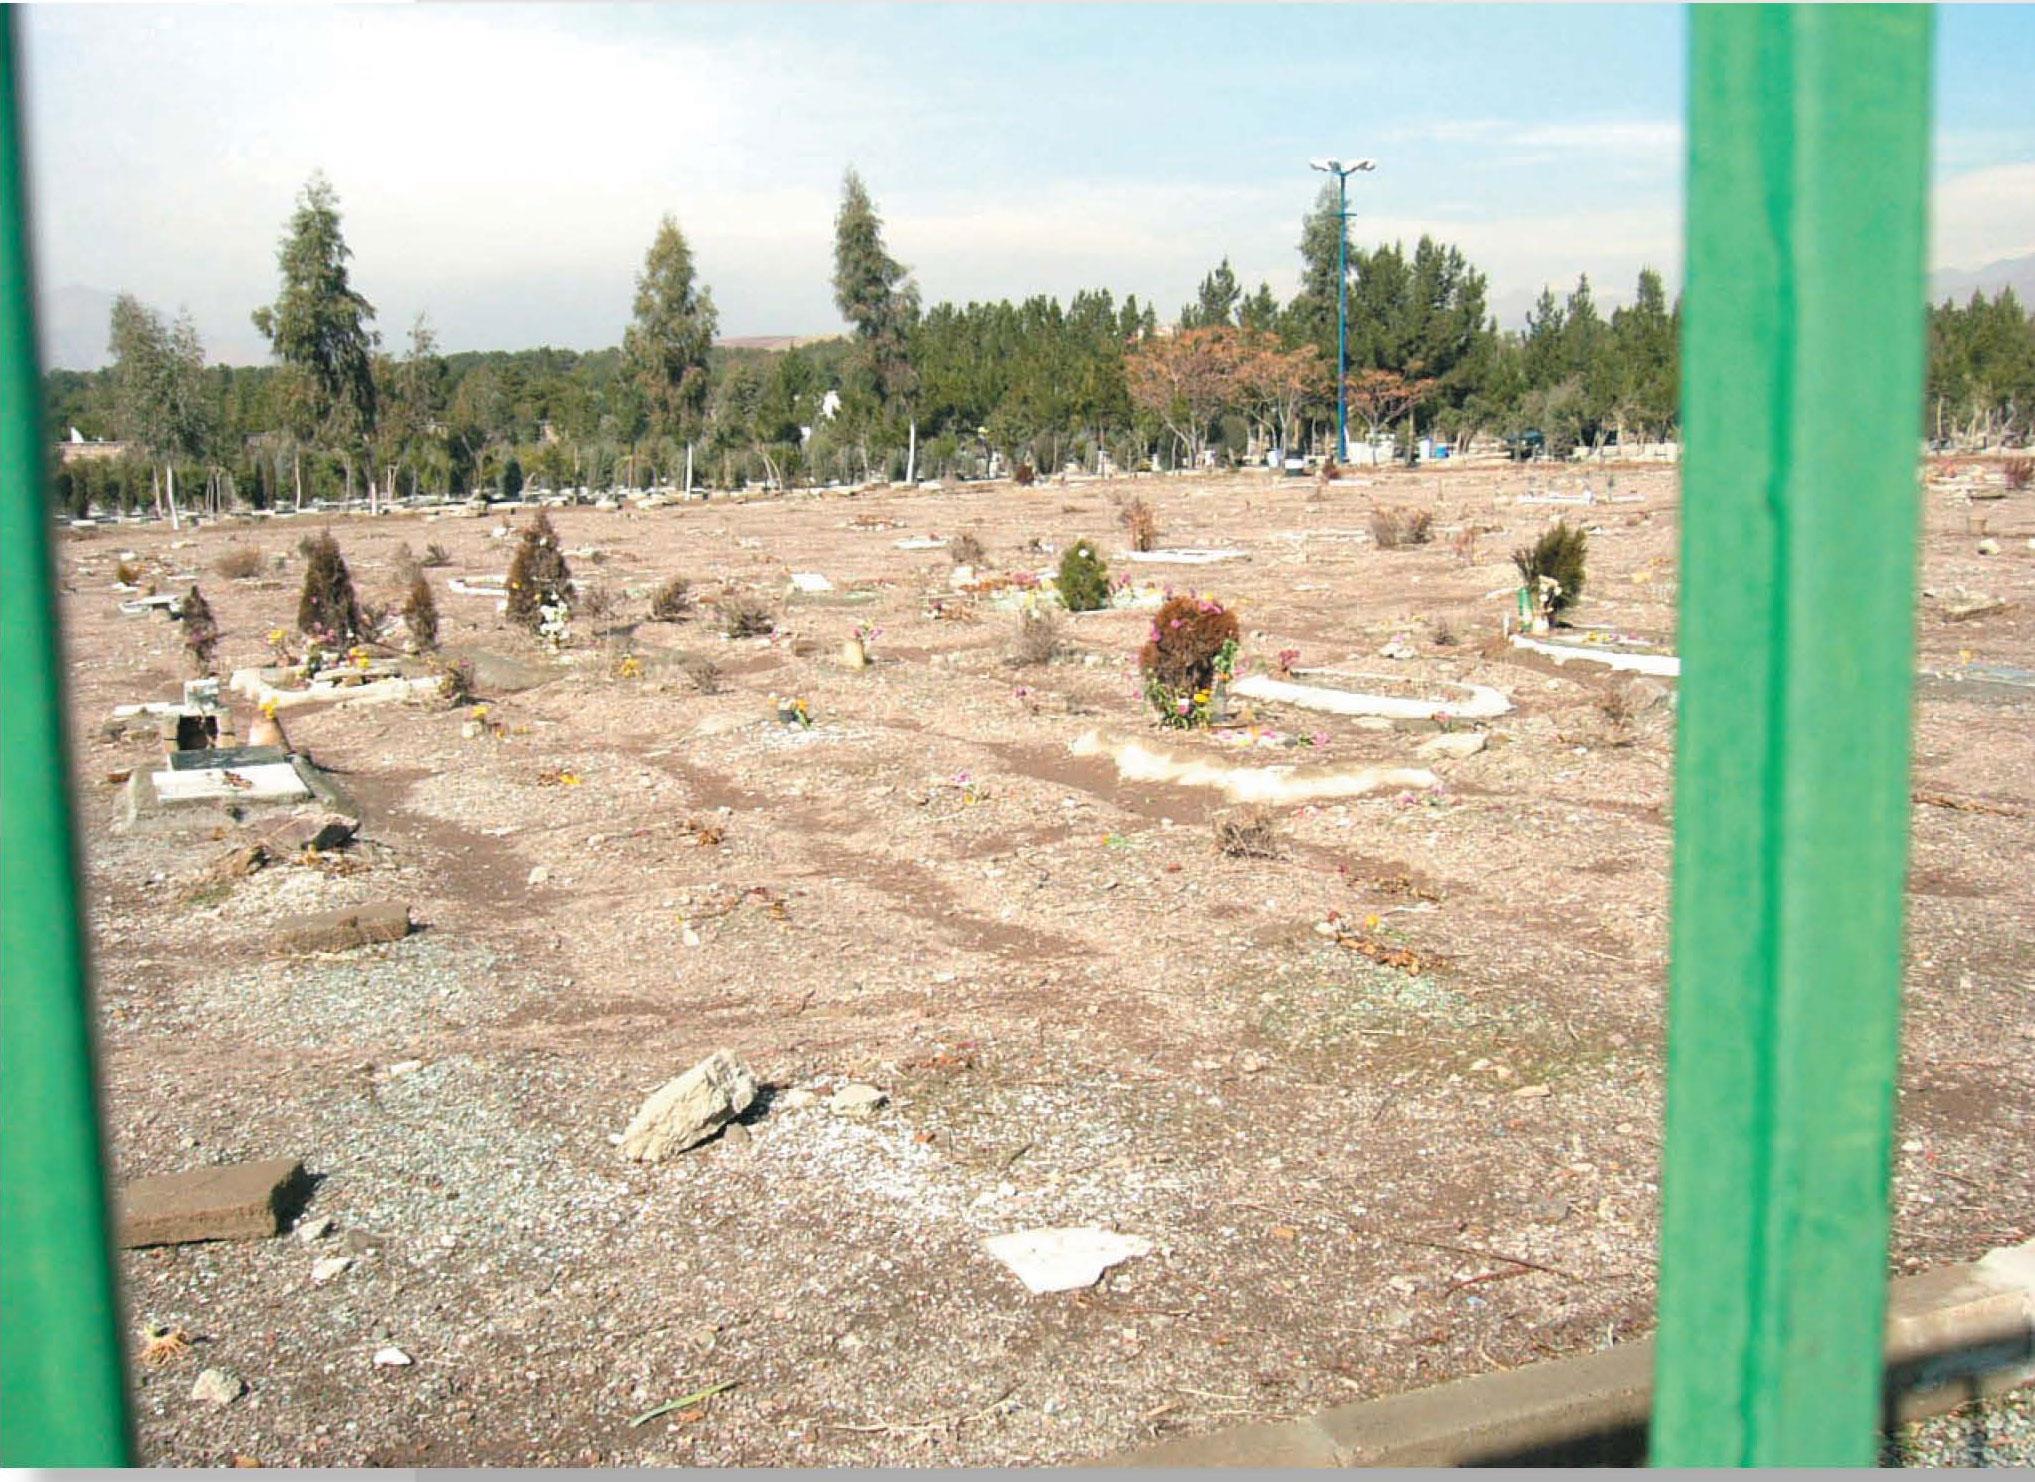  A site of mass graves of some of the political prisoners executed in the summer of 1988 